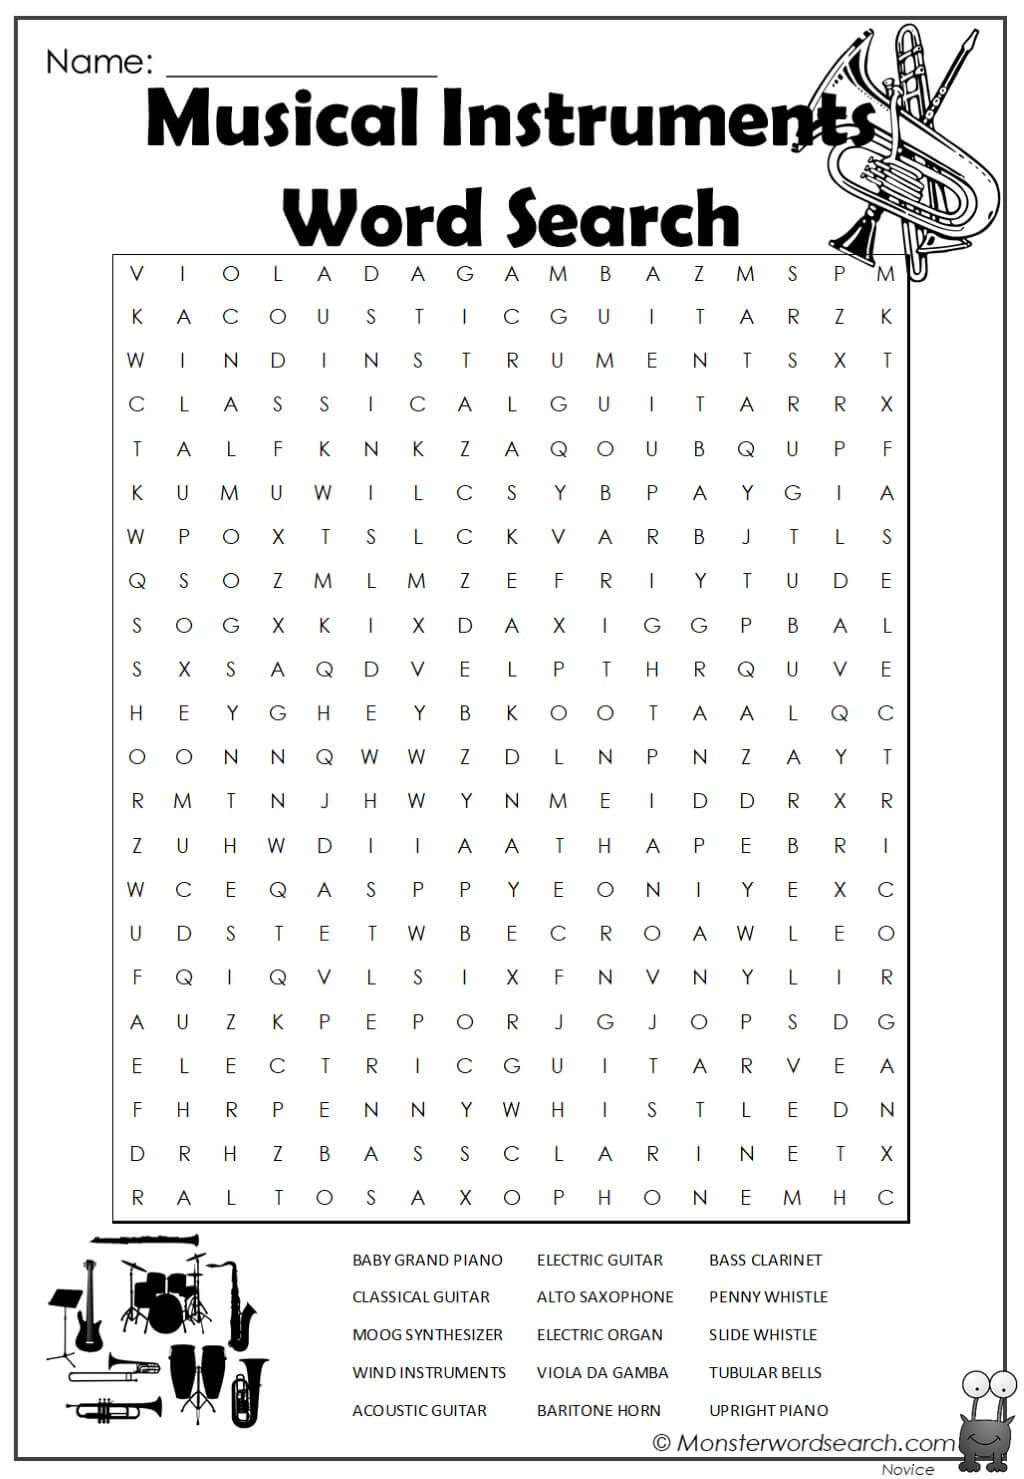 music word search wordmint download word search on elements of music